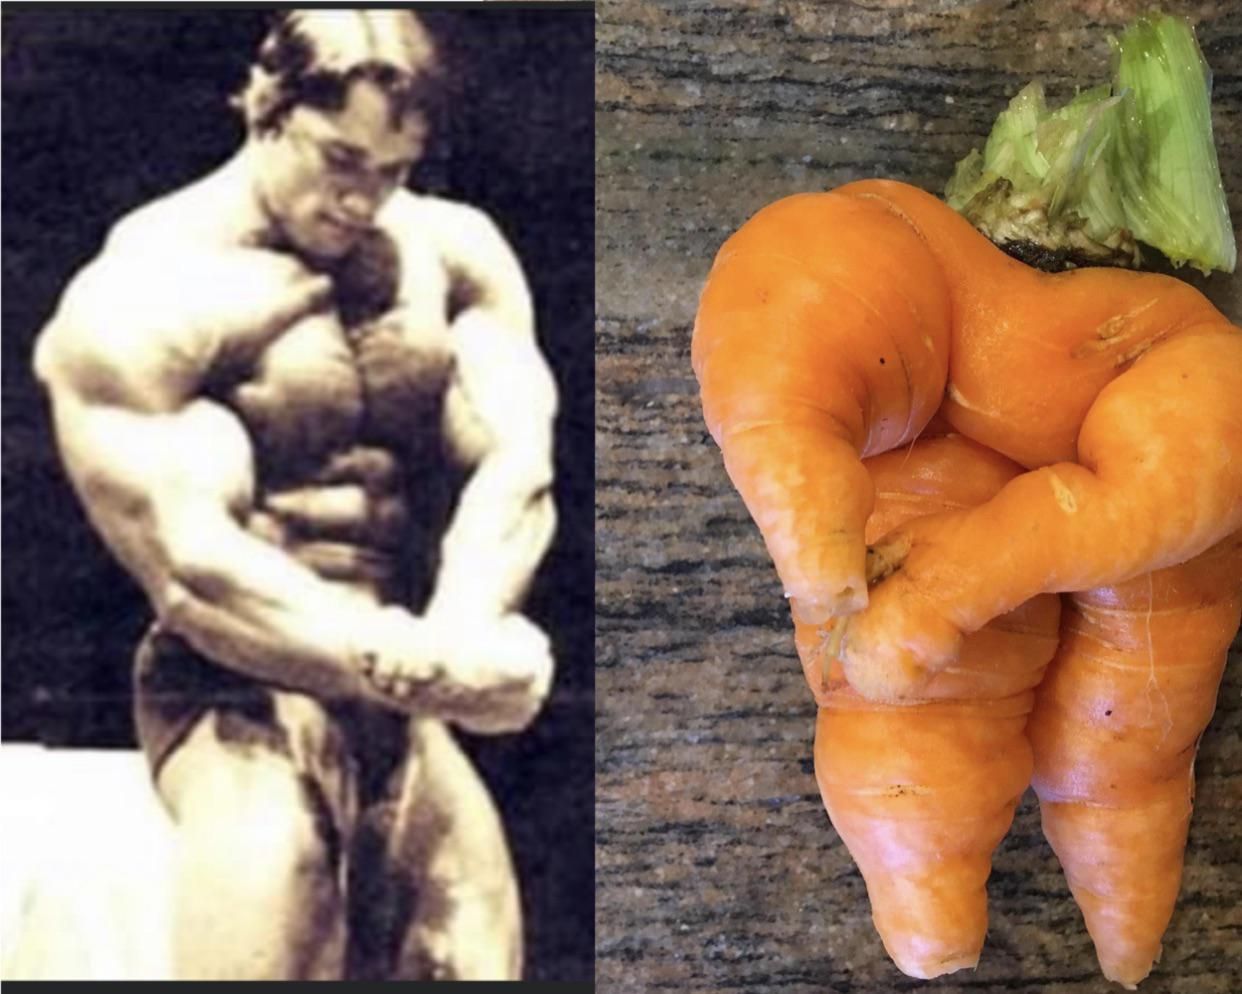 My sister grew a carrot that looks like Arnold.